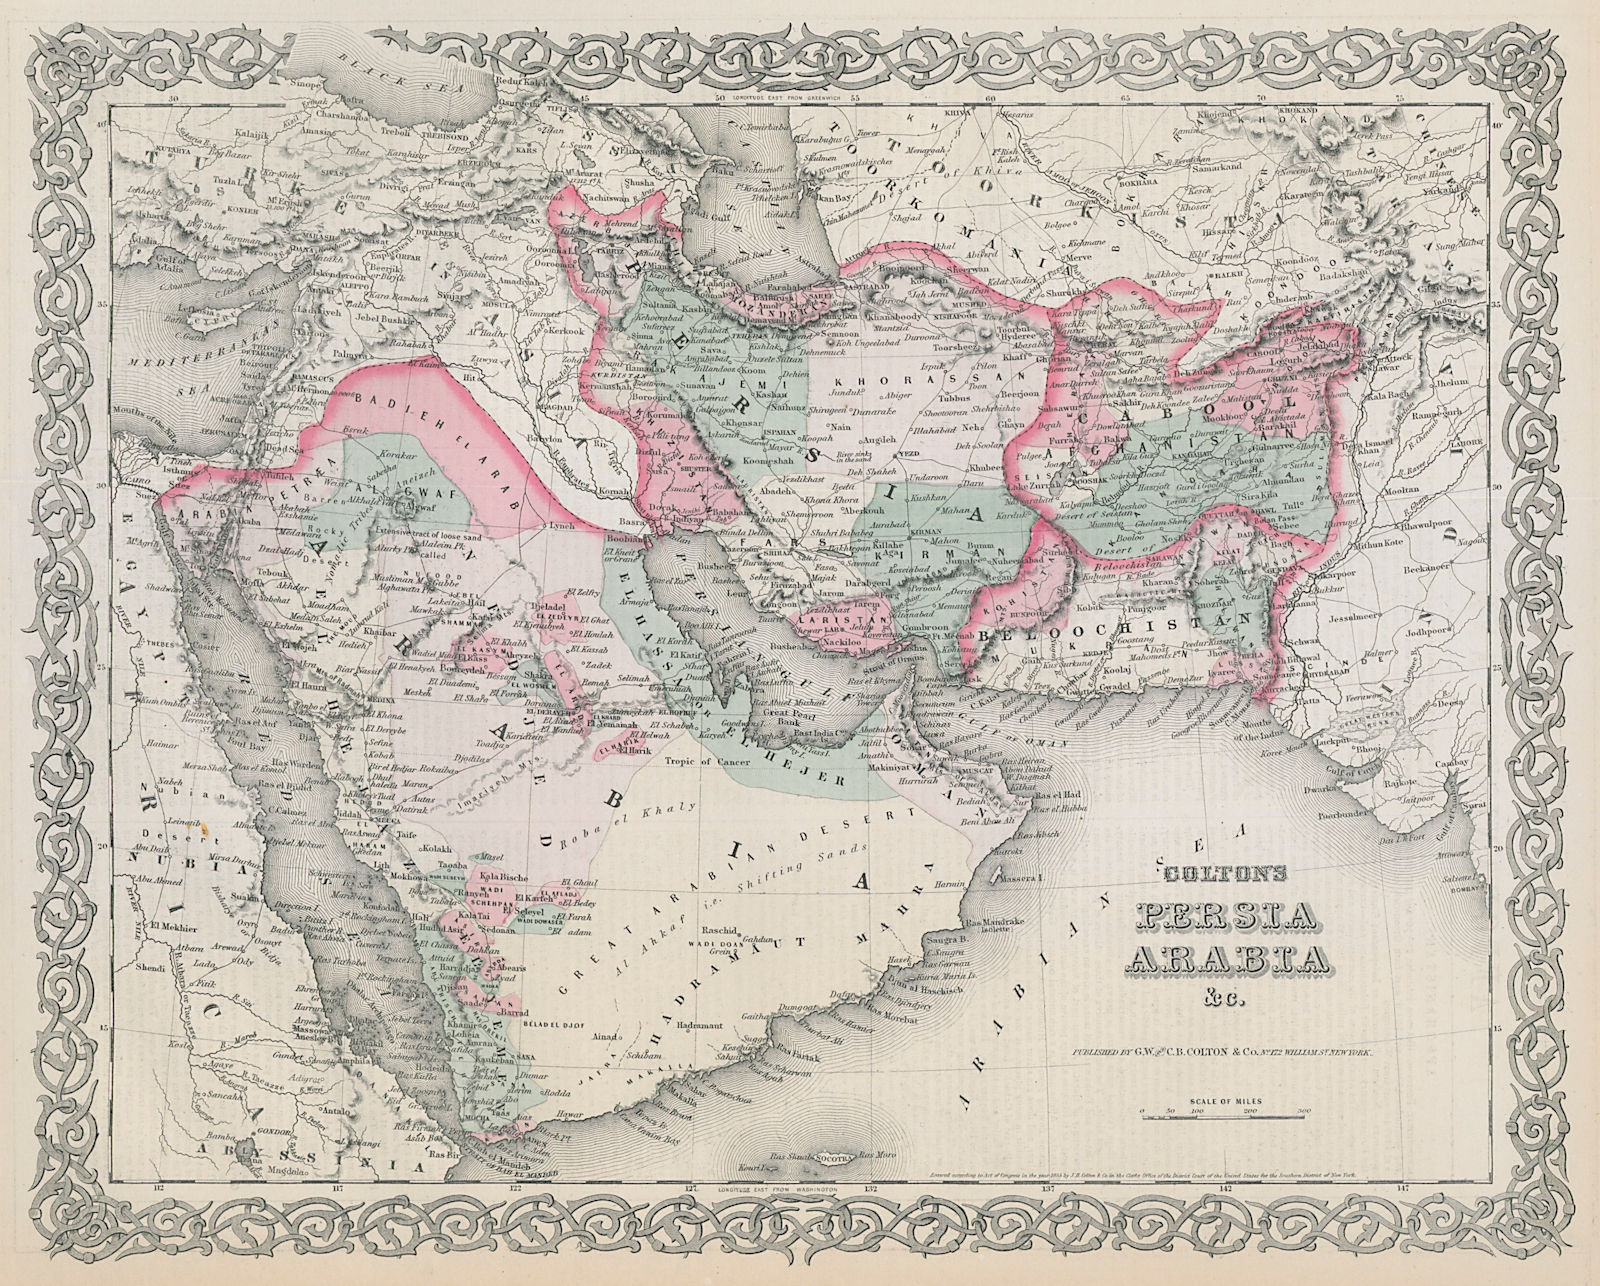 Colton's Persia, Arabia. Abothubbee (Abu Dhabi). Sharjah's Tower 1869 old map